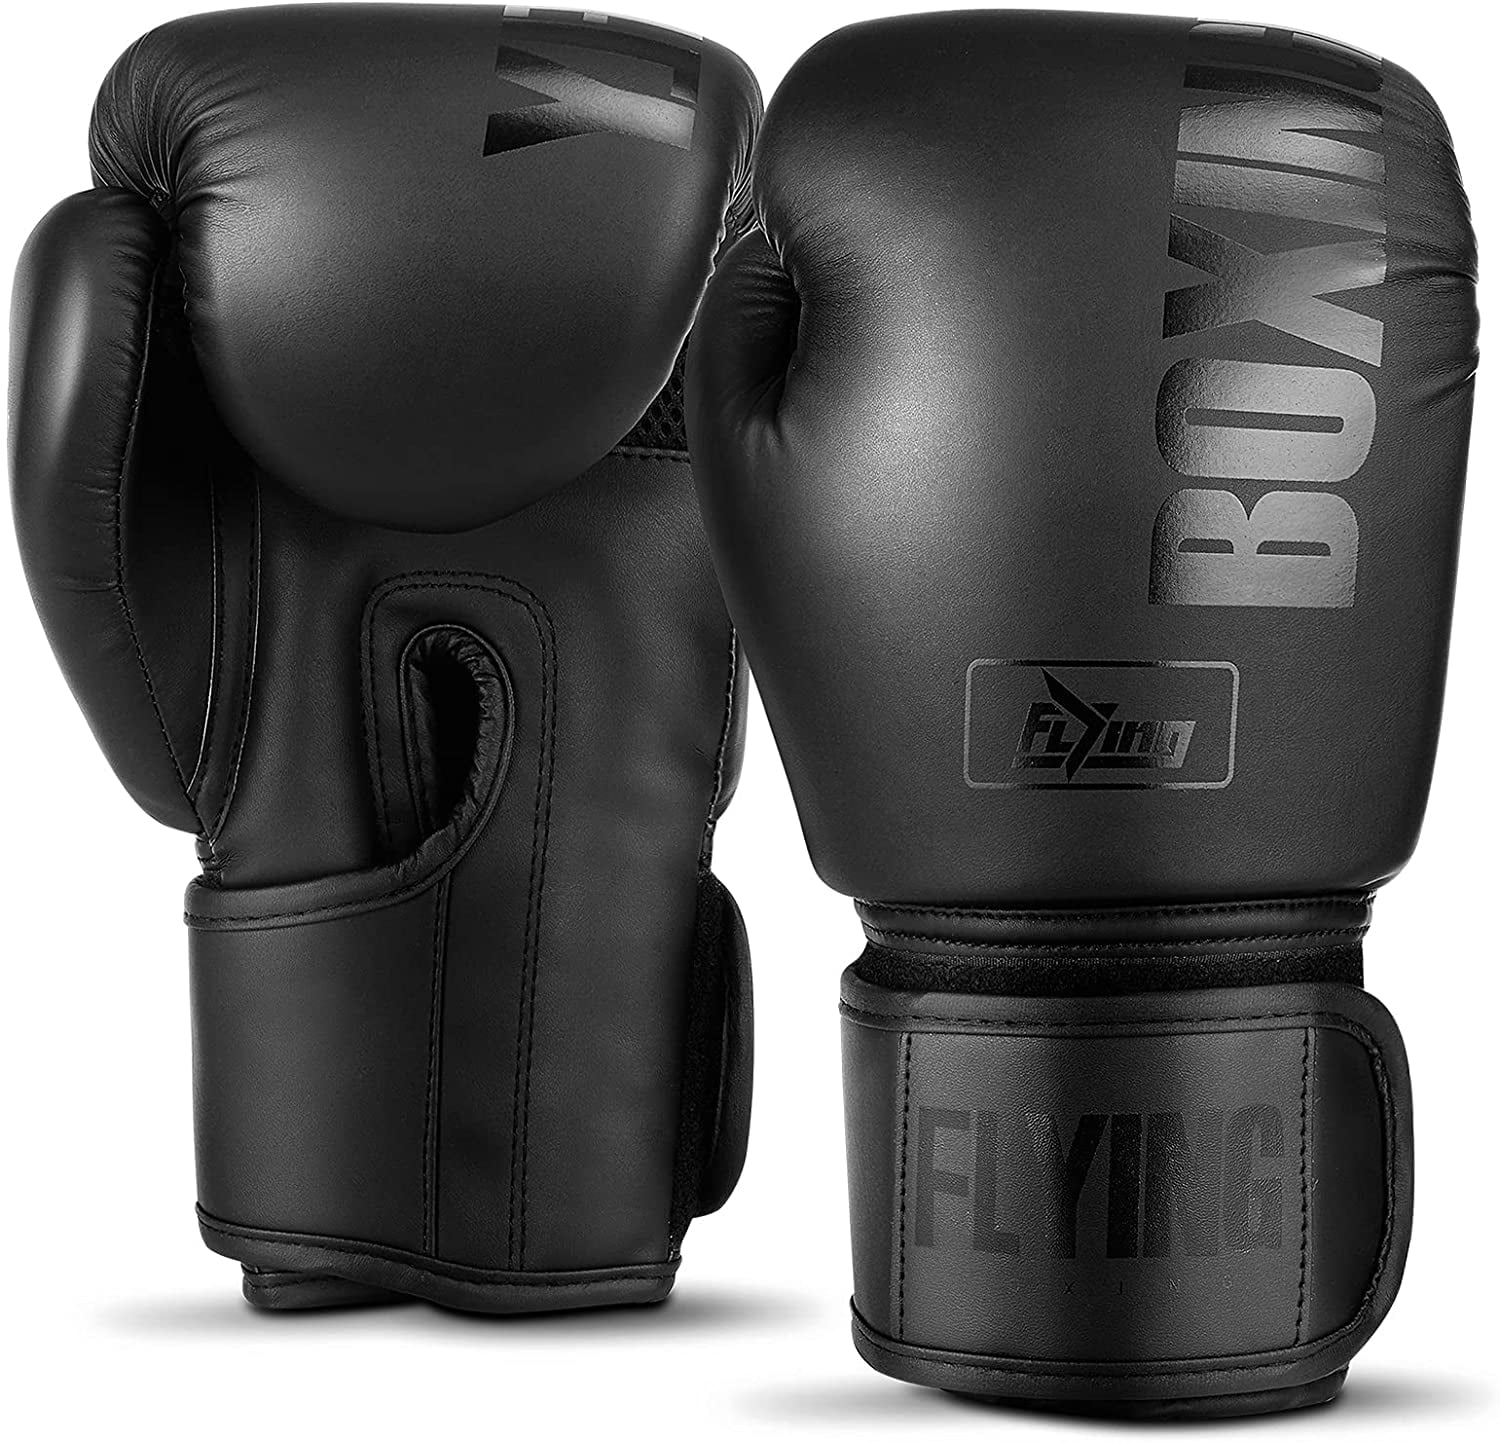 BLK ARD® Art Leather Boxing Gloves Fight Punching Bag MMA Muay Thai Kickboxing 